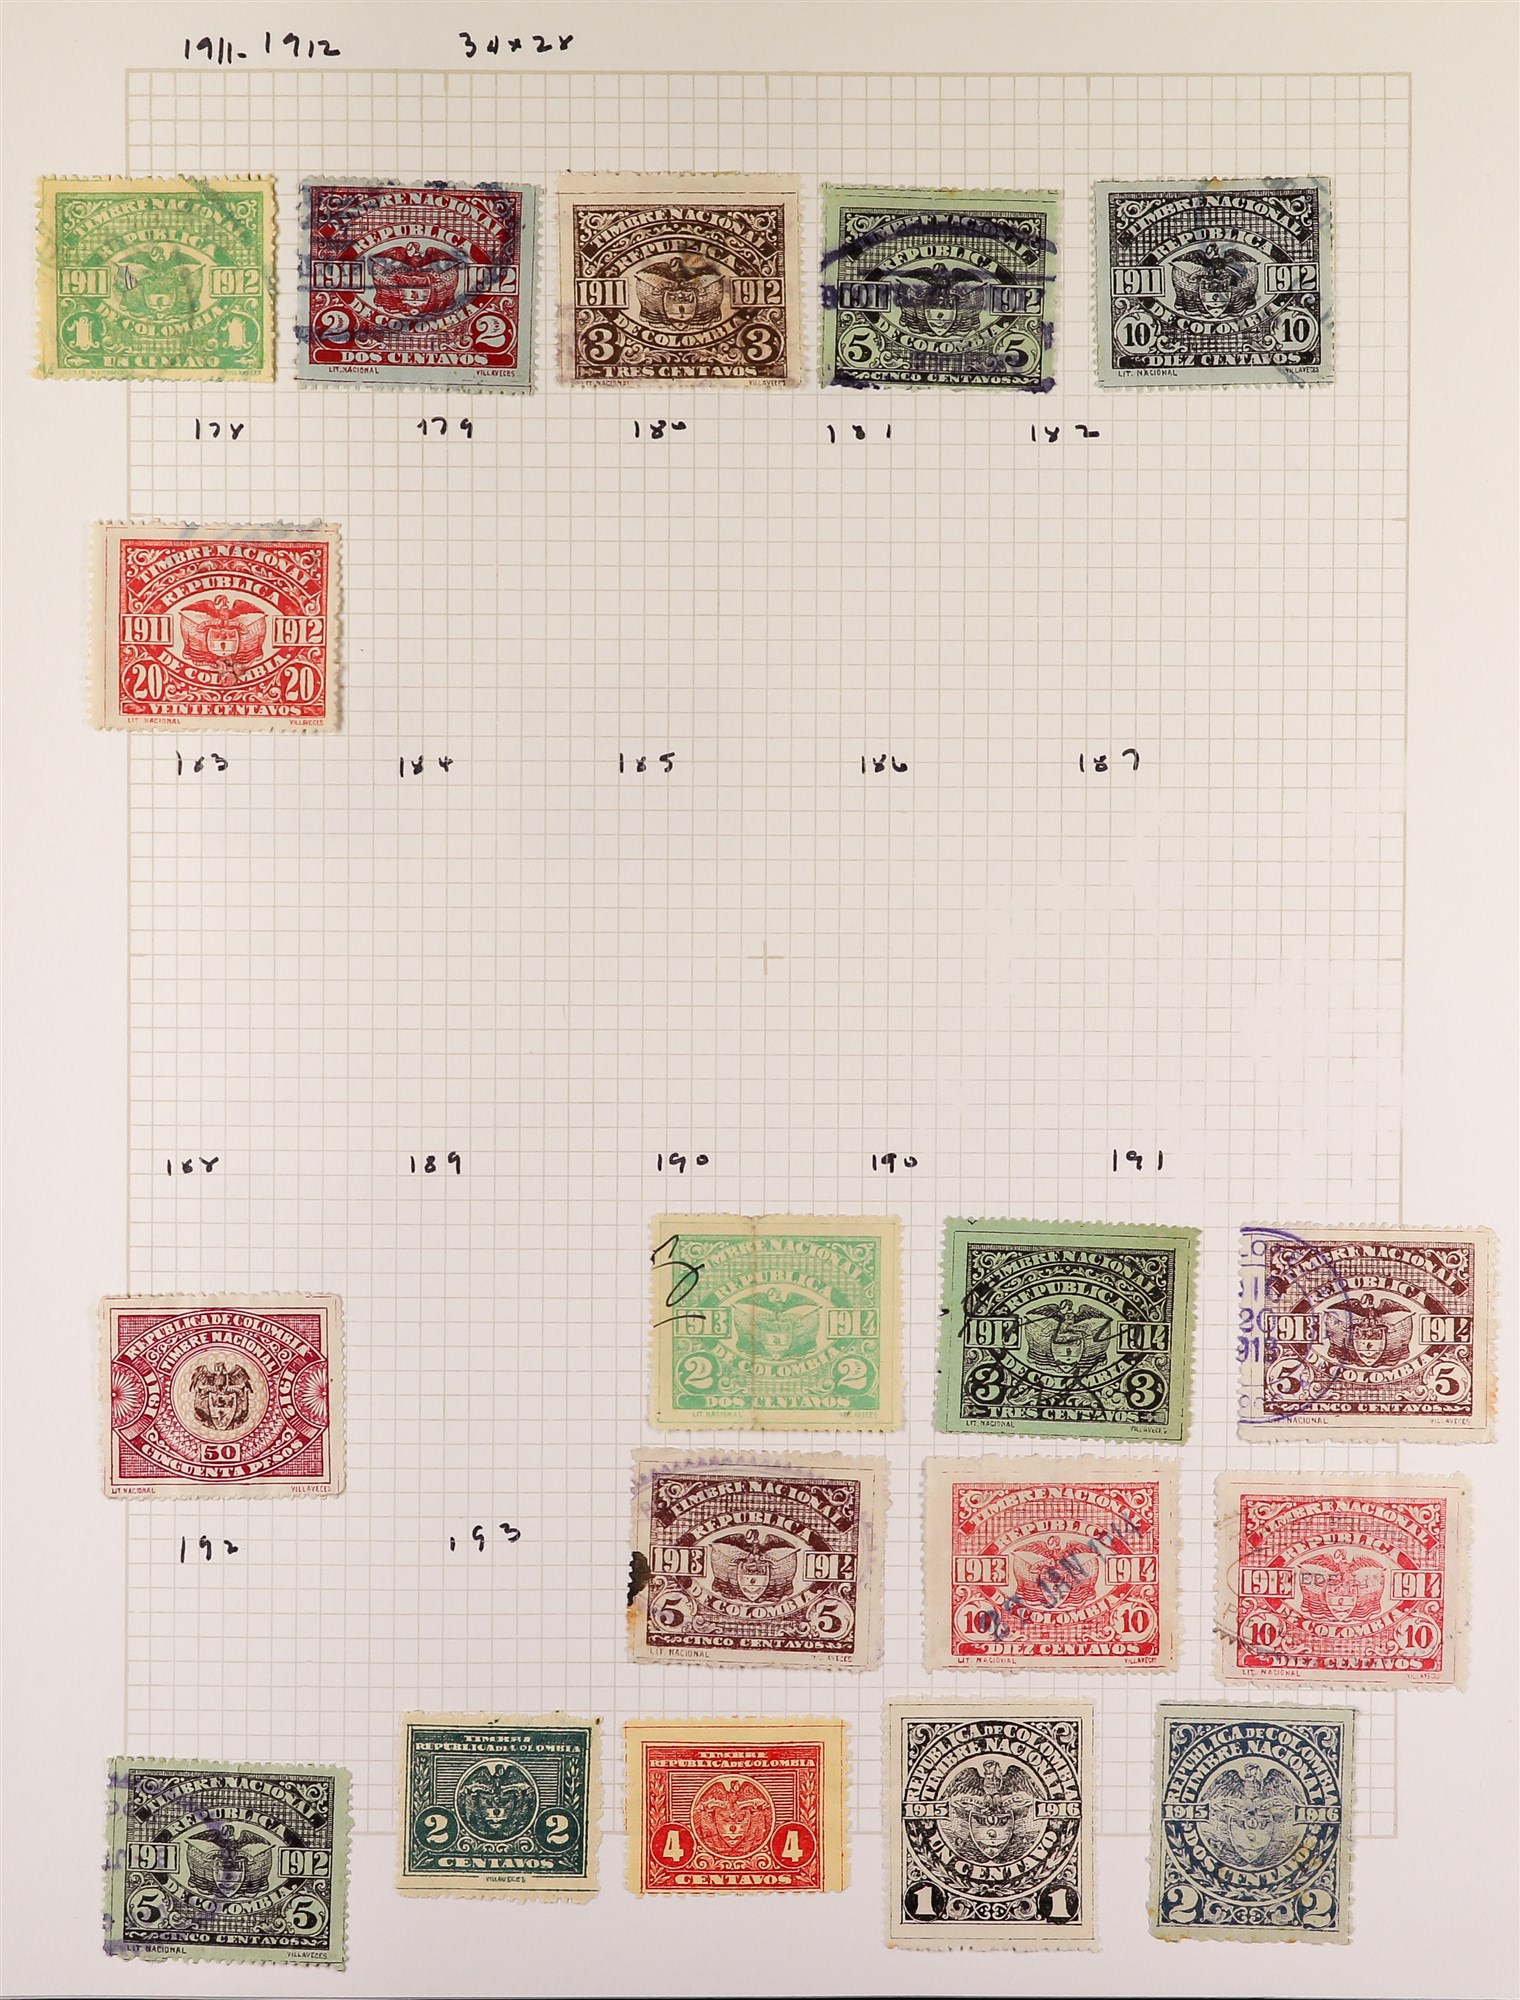 COLOMBIA REVENUE STAMPS COLLECTION largely 19th century issues on pages and in packets, incl. Timbre - Image 5 of 10